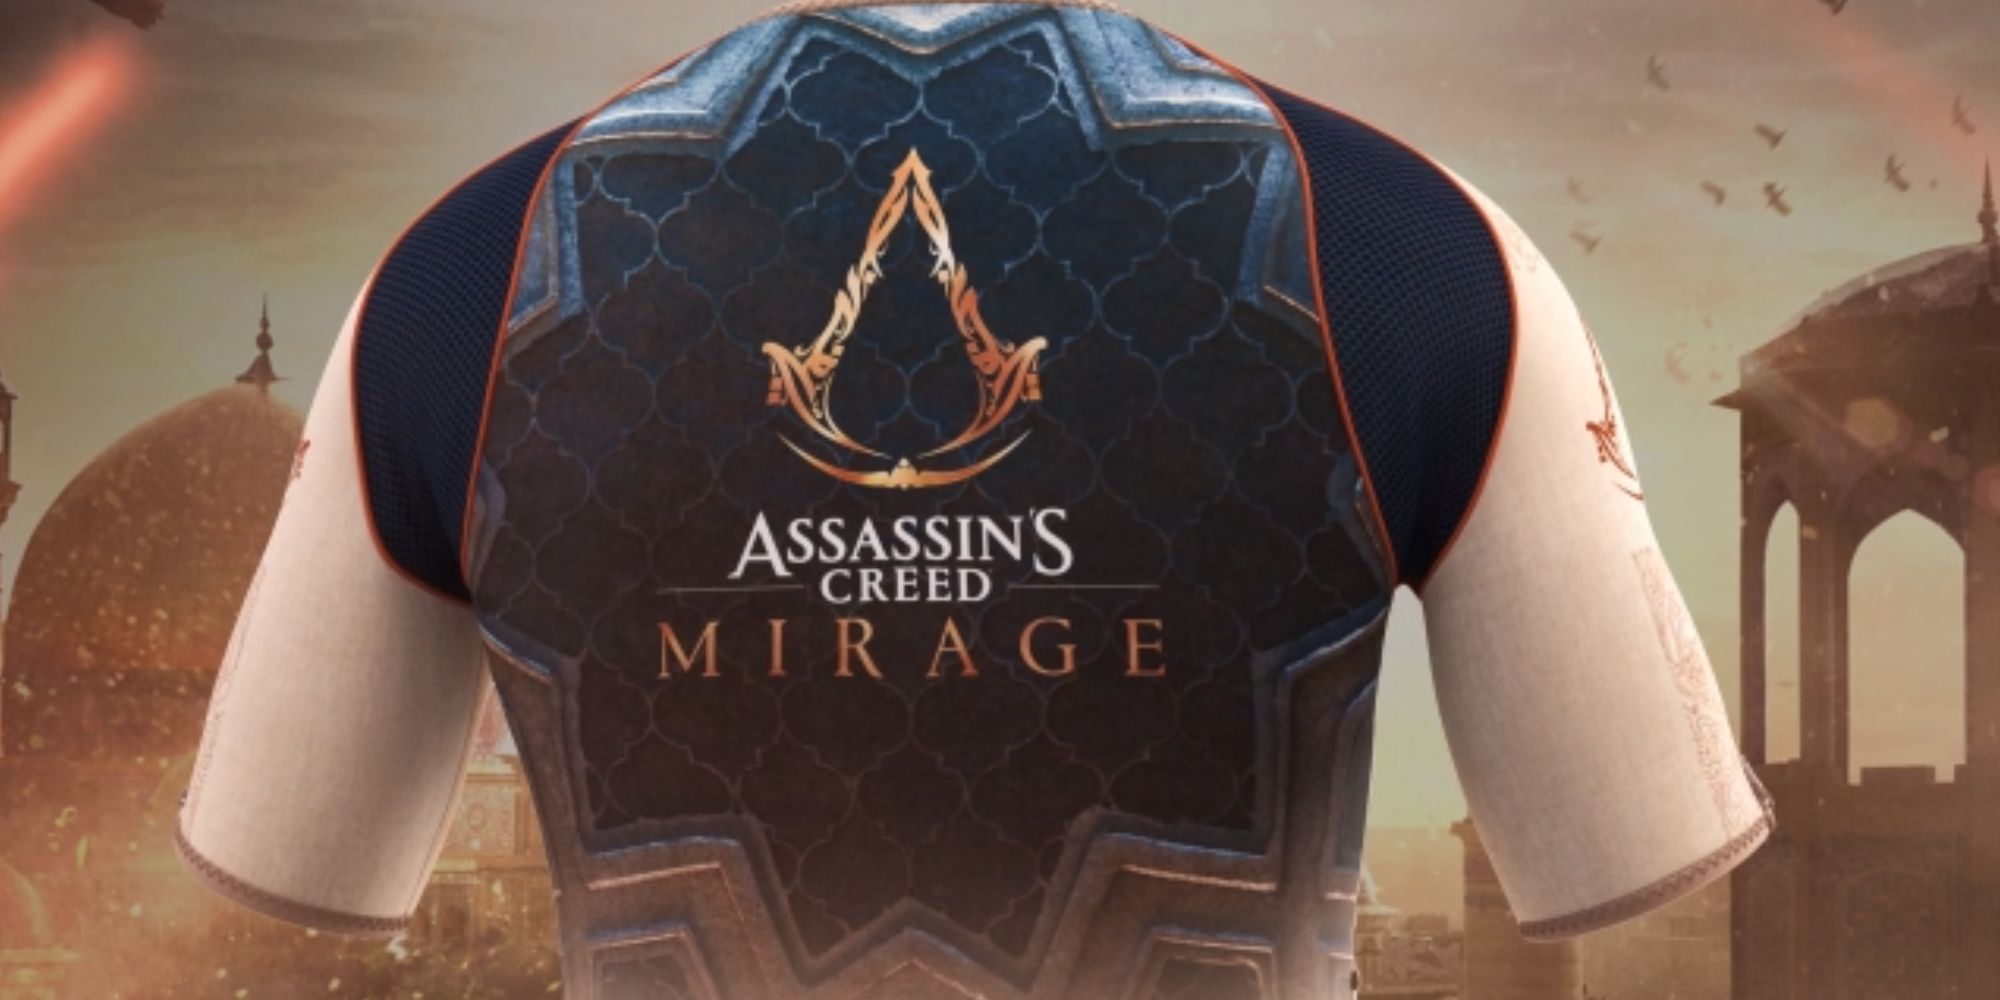 Ubisoft Wants You To Buy An Expensive Bodysuit To Feel “Different Sensations” In Assassin’s Creed Mirage